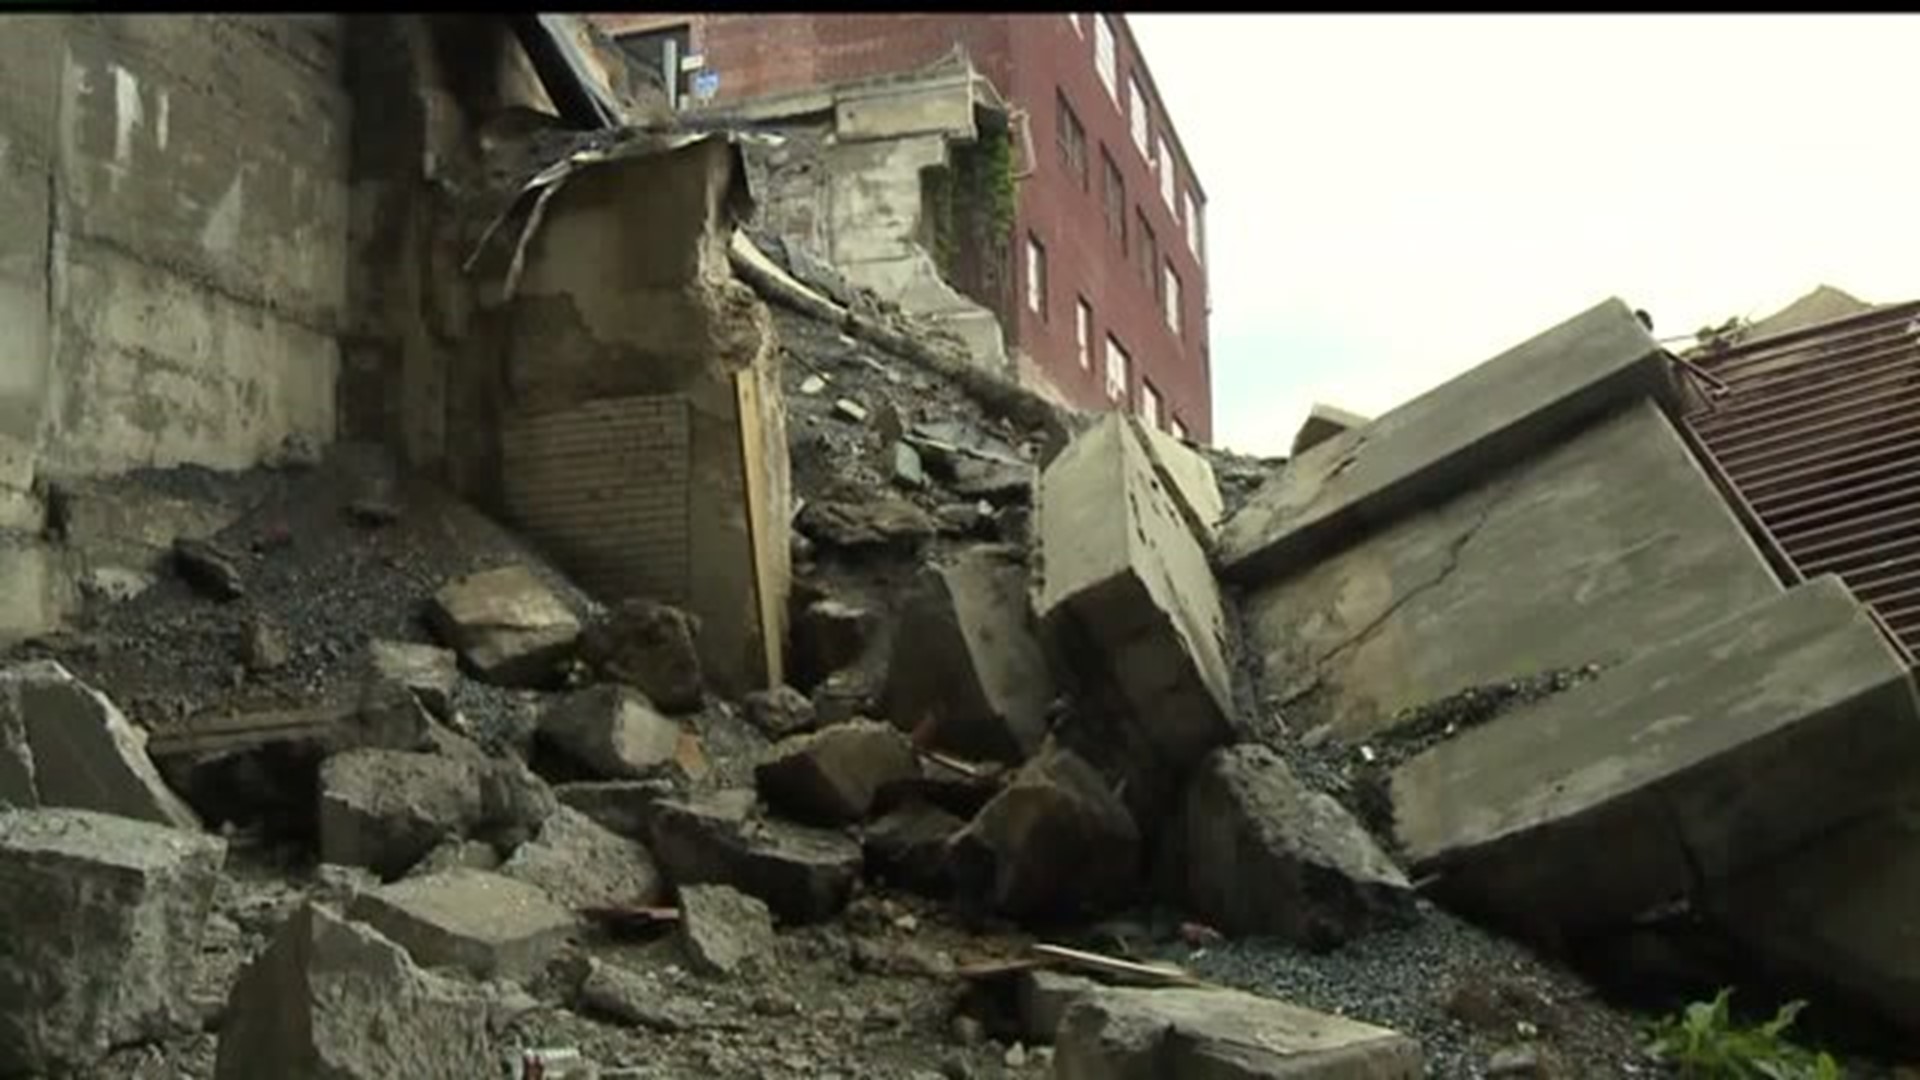 Harrisburg code enforcement officials may be taking action on wall collapse